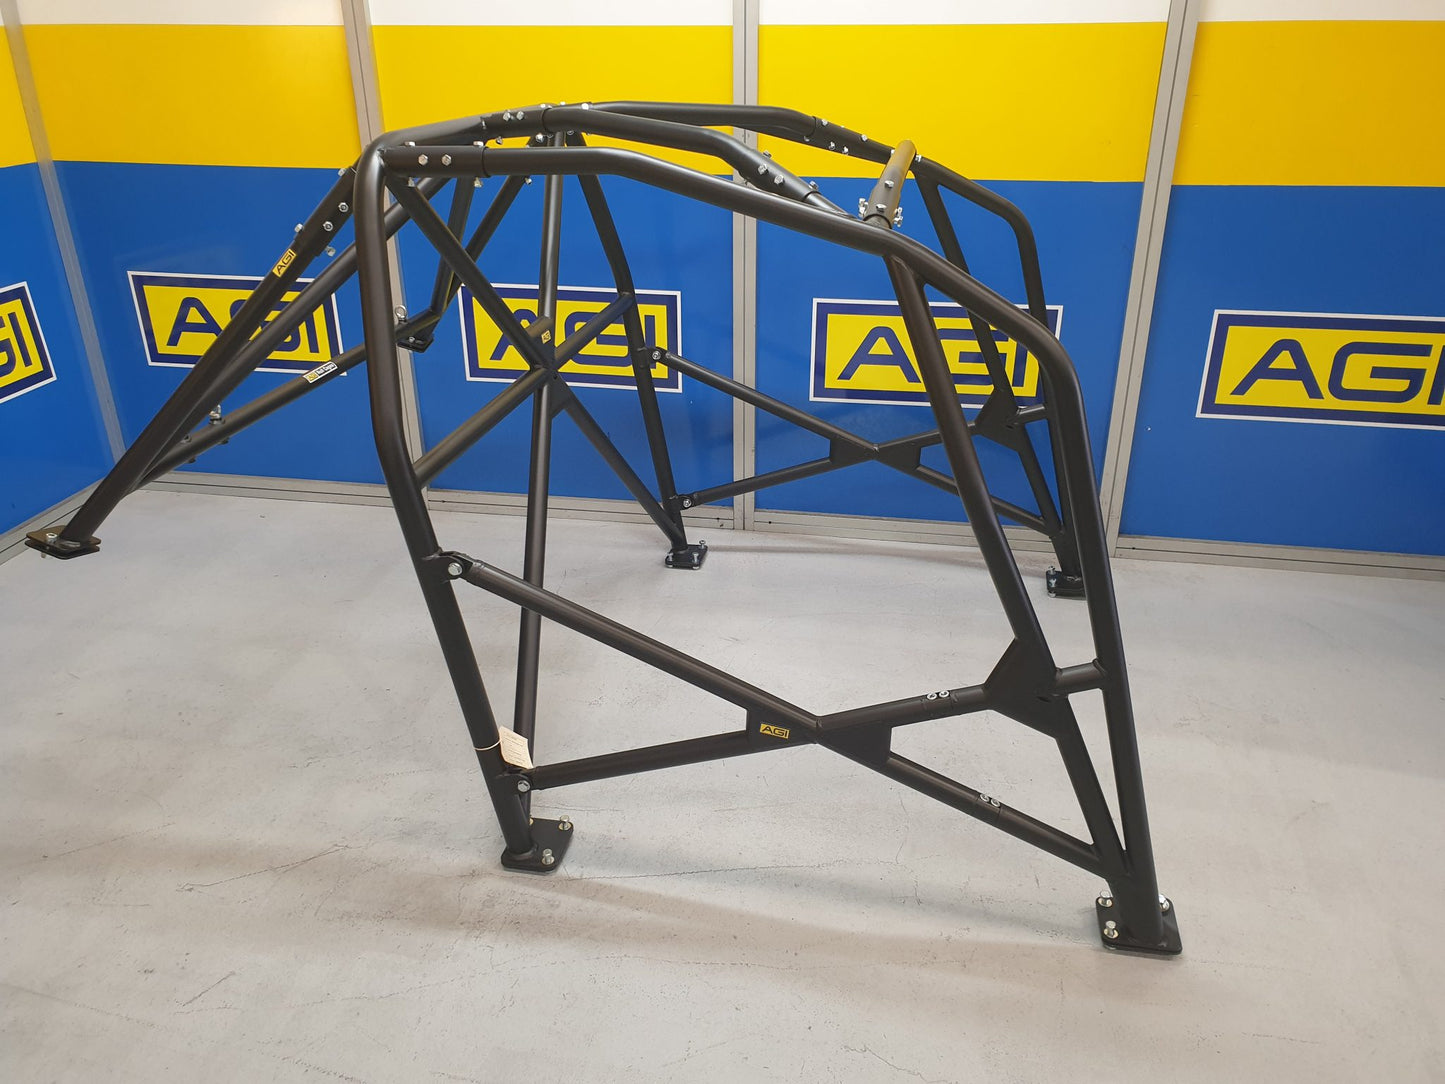 AGI roll cage BMW E46 COUPE – FULL CAGE – 6PT – BOLT IN, National Level race meetings, Gravel Rallies or Tarmac Rally events